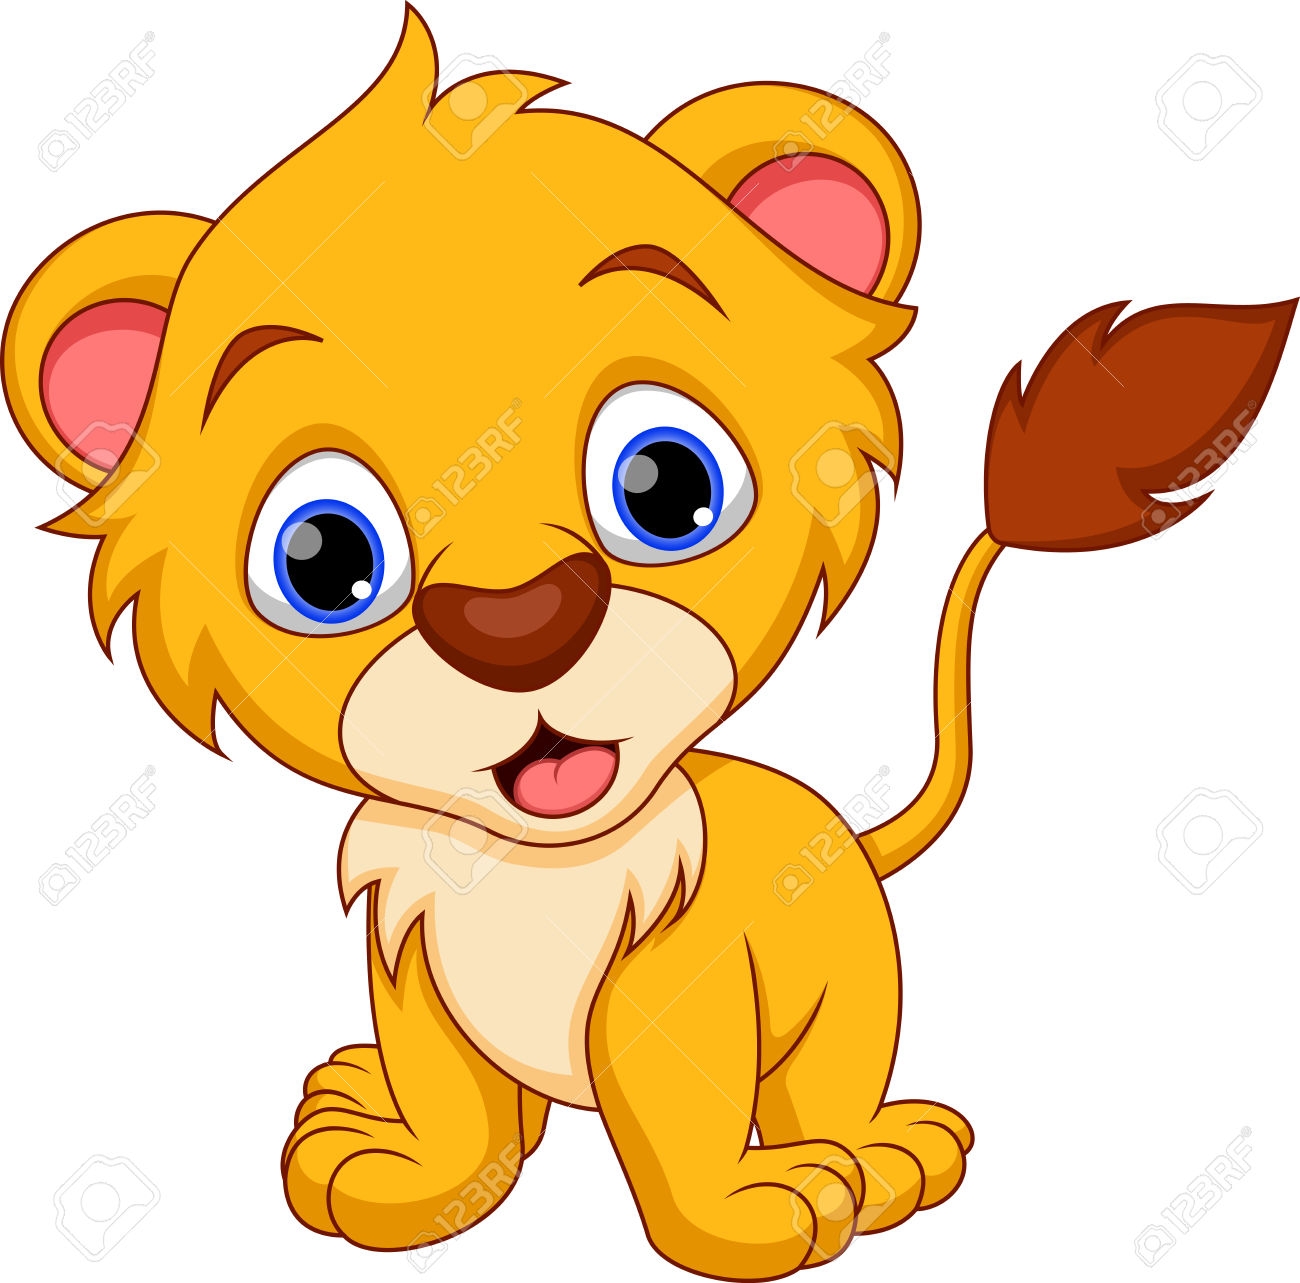 Animated Lions Pictures | Free download on ClipArtMag